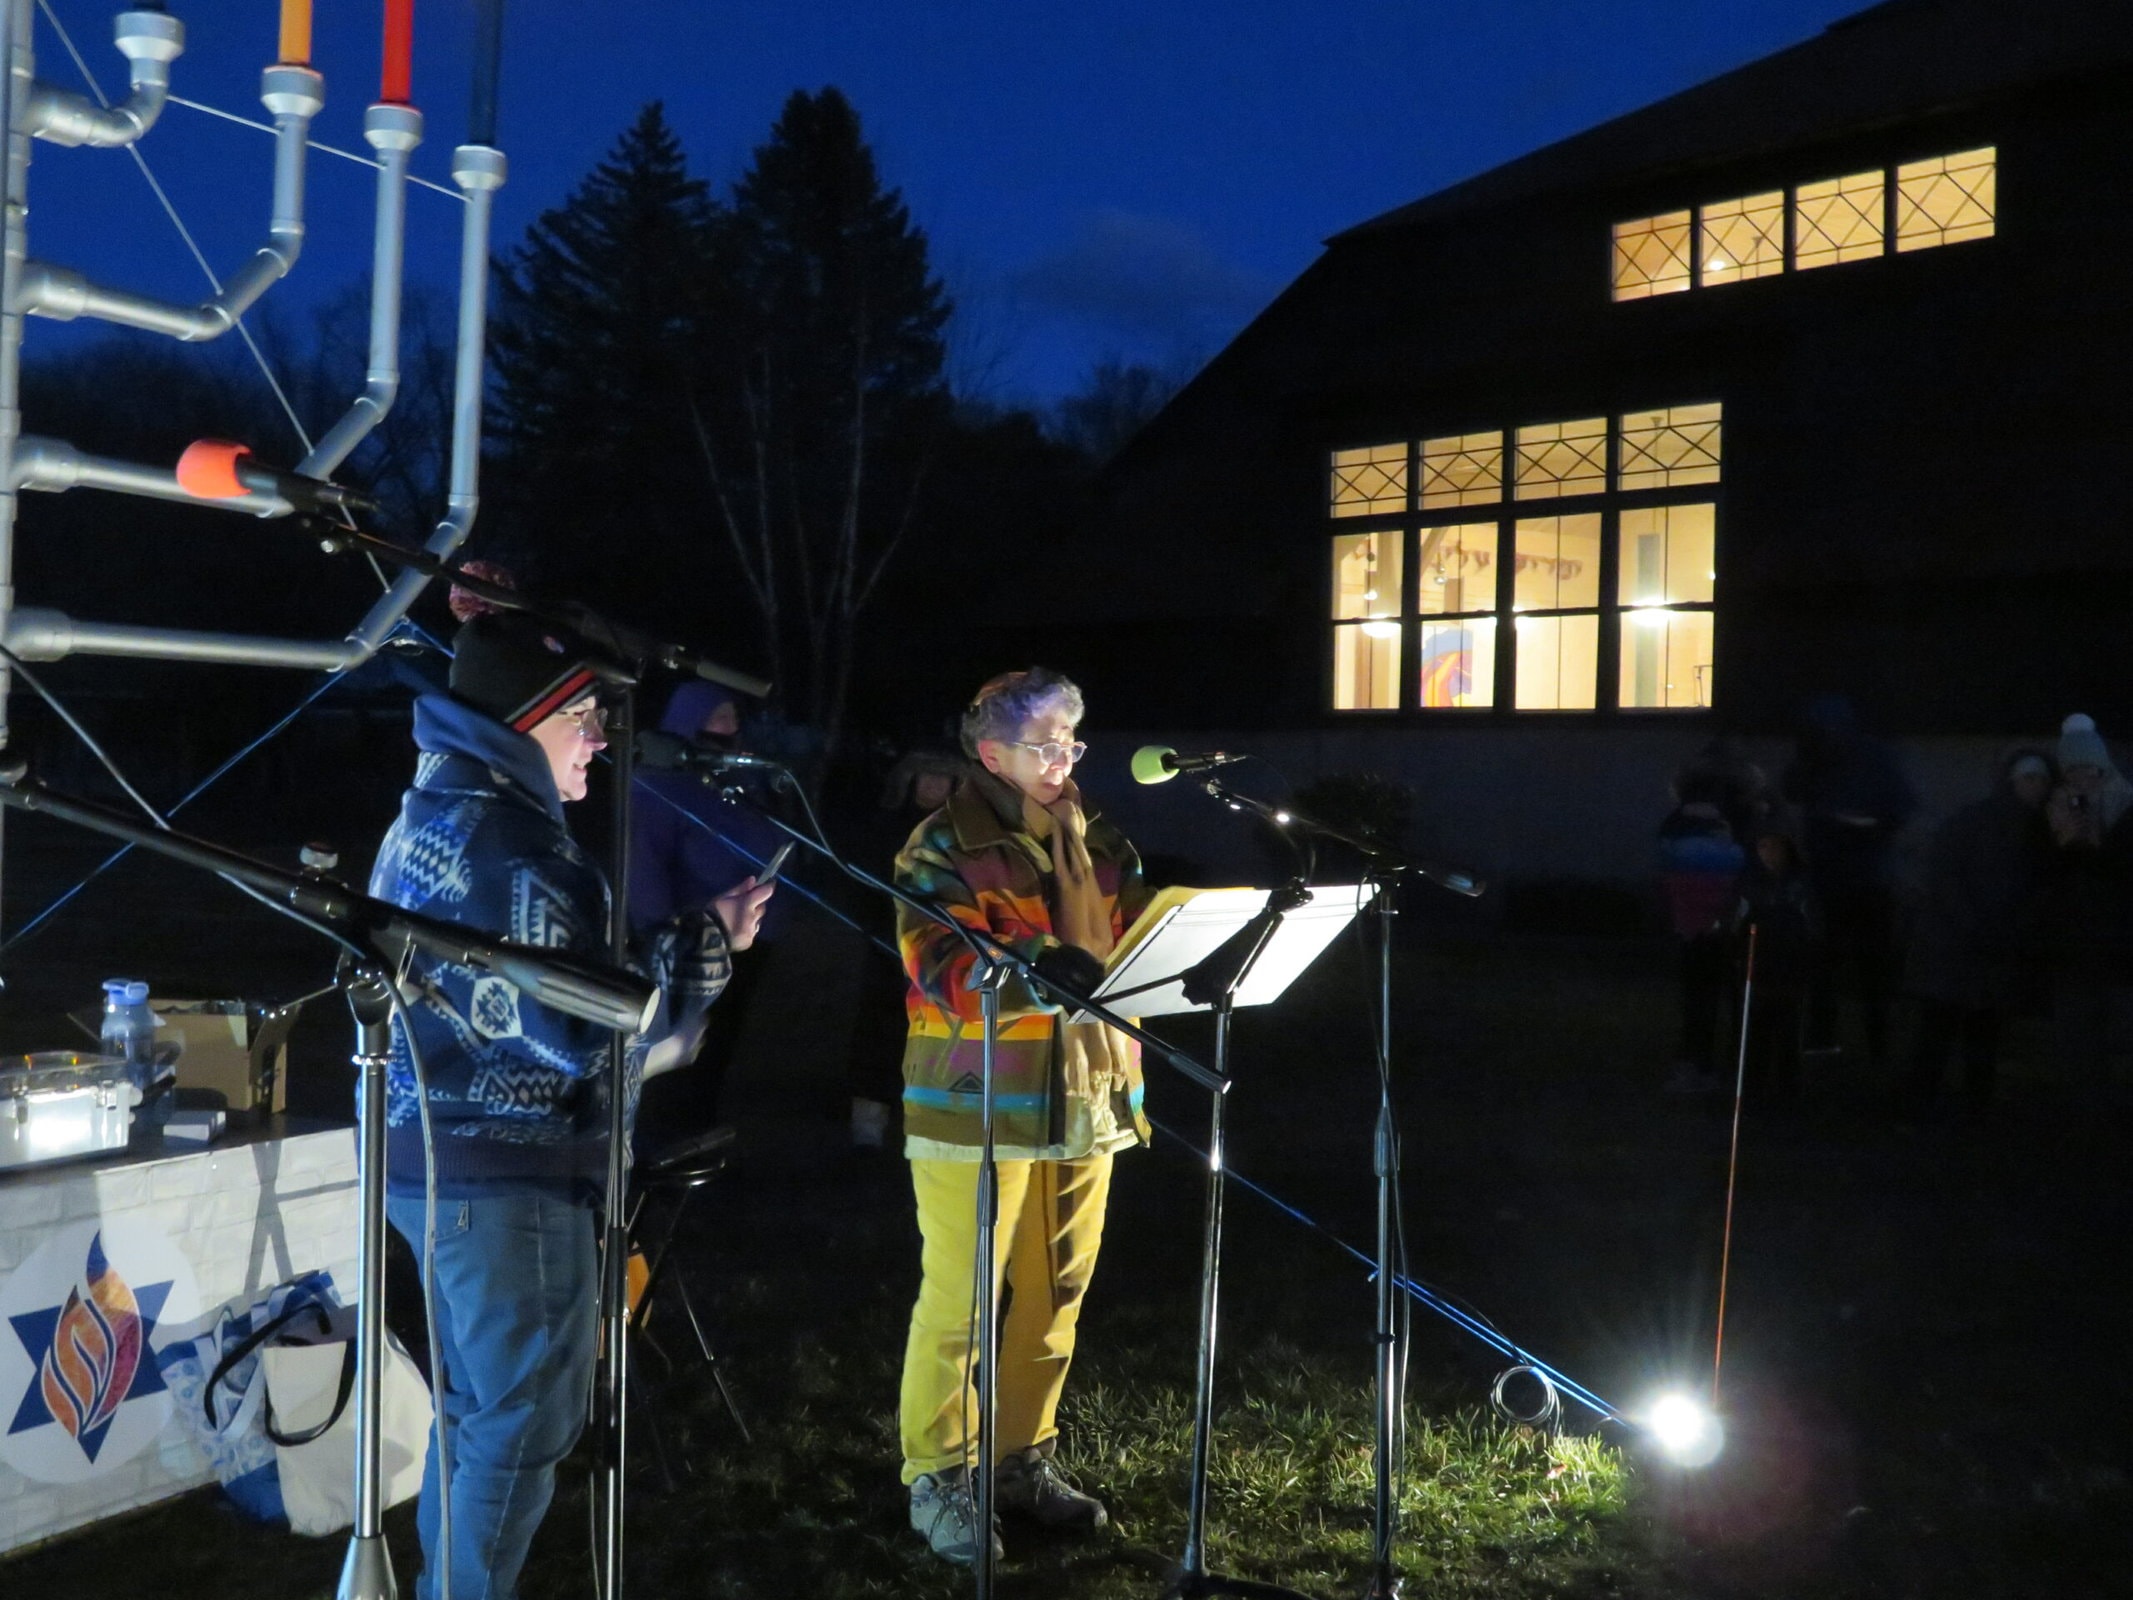 Westborough welcomes the arrival of Hanukkah